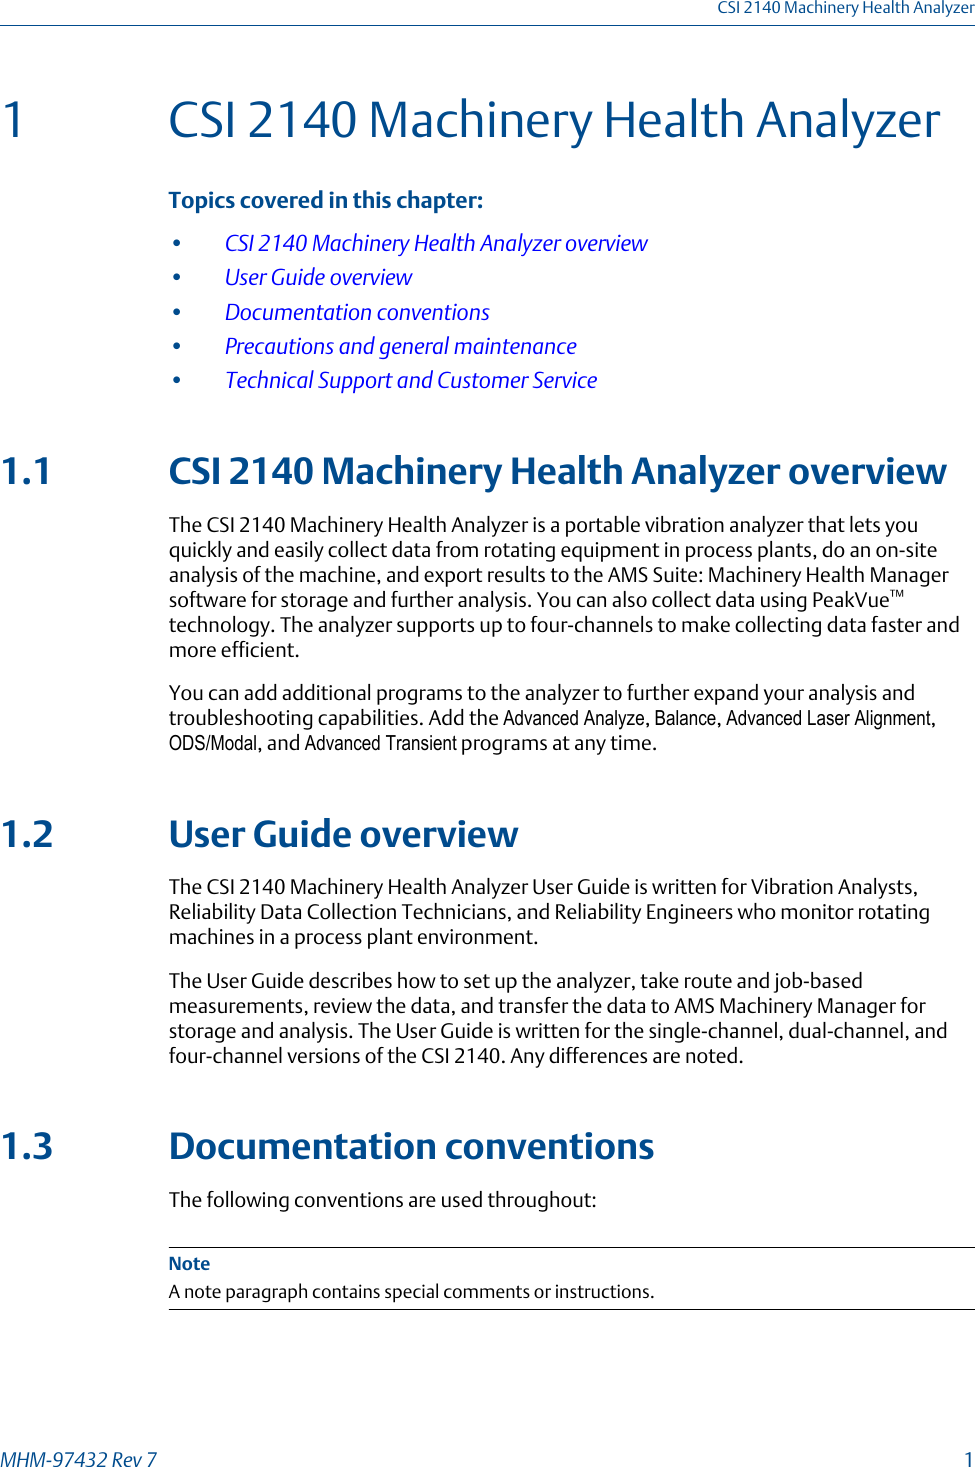 1 CSI 2140 Machinery Health AnalyzerTopics covered in this chapter:•CSI 2140 Machinery Health Analyzer overview•User Guide overview•Documentation conventions•Precautions and general maintenance•Technical Support and Customer Service1.1 CSI 2140 Machinery Health Analyzer overviewThe CSI 2140 Machinery Health Analyzer is a portable vibration analyzer that lets youquickly and easily collect data from rotating equipment in process plants, do an on-siteanalysis of the machine, and export results to the AMS Suite: Machinery Health Managersoftware for storage and further analysis. You can also collect data using PeakVue™technology. The analyzer supports up to four-channels to make collecting data faster andmore efficient.You can add additional programs to the analyzer to further expand your analysis andtroubleshooting capabilities. Add the Advanced Analyze, Balance, Advanced Laser Alignment,ODS/Modal, and Advanced Transient programs at any time.1.2 User Guide overviewThe CSI 2140 Machinery Health Analyzer User Guide is written for Vibration Analysts,Reliability Data Collection Technicians, and Reliability Engineers who monitor rotatingmachines in a process plant environment.The User Guide describes how to set up the analyzer, take route and job-basedmeasurements, review the data, and transfer the data to AMS Machinery Manager forstorage and analysis. The User Guide is written for the single-channel, dual-channel, andfour-channel versions of the CSI 2140. Any differences are noted.1.3 Documentation conventionsThe following conventions are used throughout:NoteA note paragraph contains special comments or instructions.CSI 2140 Machinery Health AnalyzerMHM-97432 Rev 7  1